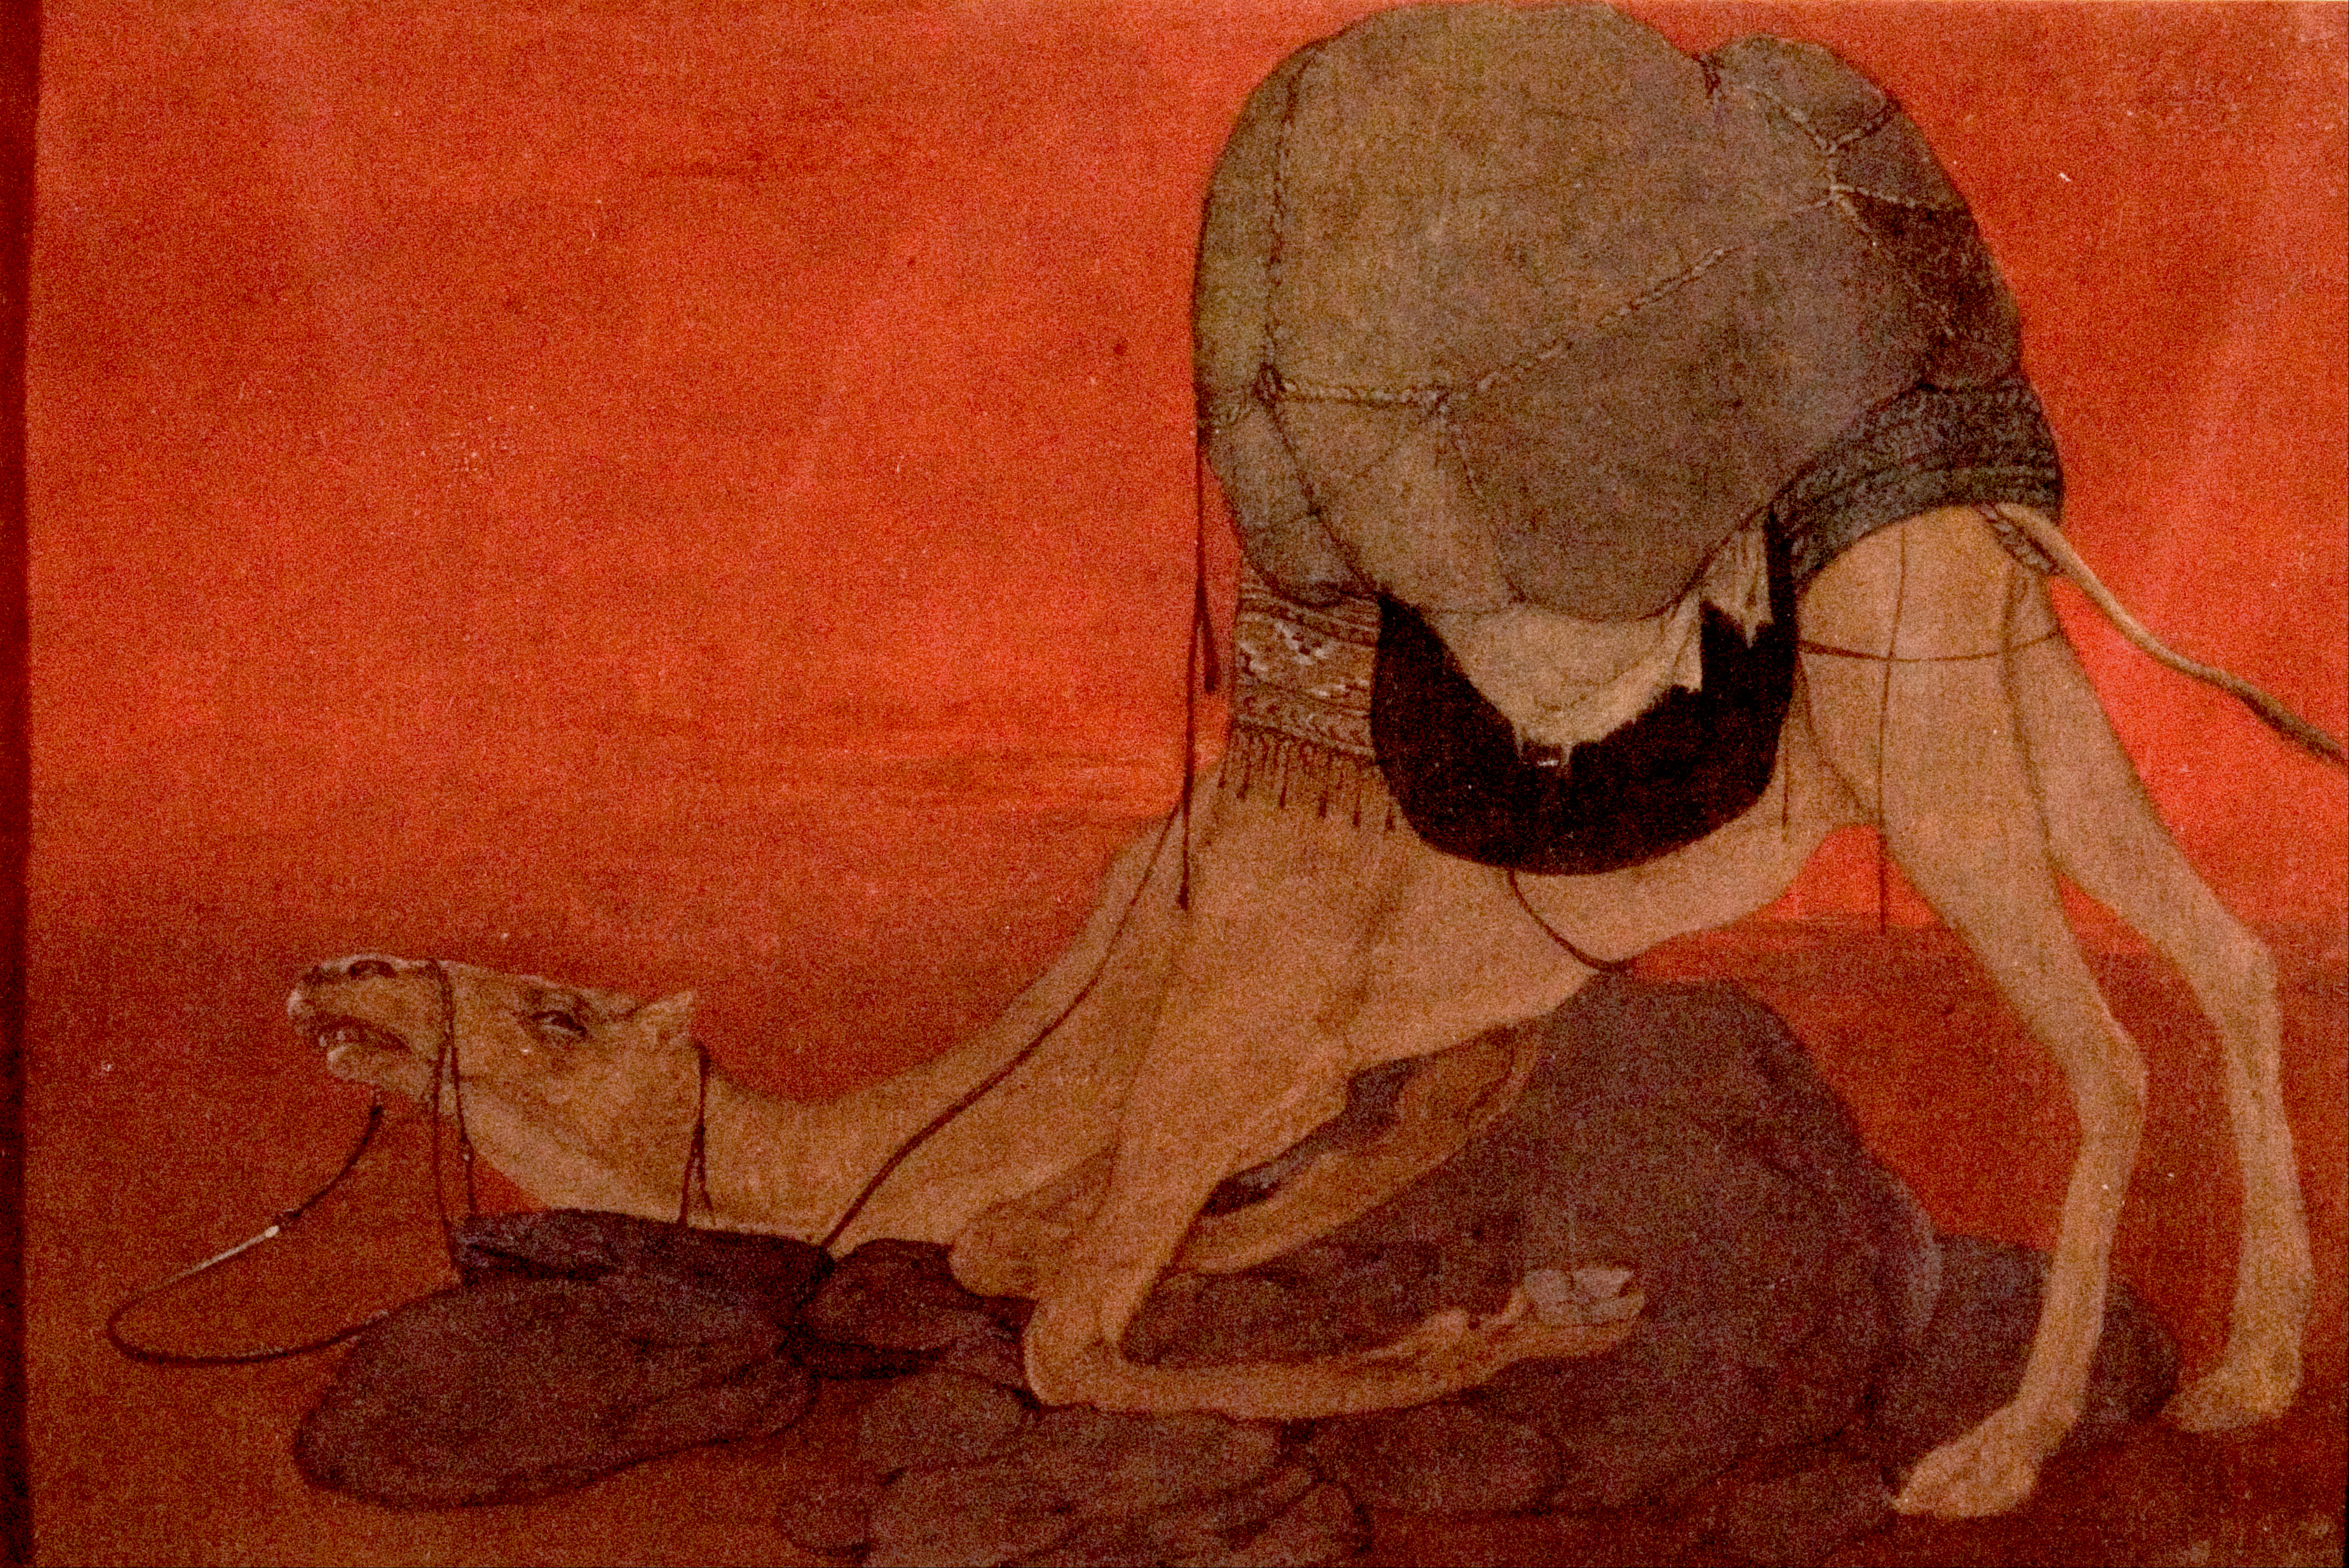 Abanindranath Tagore (1871–1951), founder of the Bengal School of painting, The Journey’s End, c. 1913, tempera on paper (National Gallery of Modern Art, New Delhi, accession no. 1832)